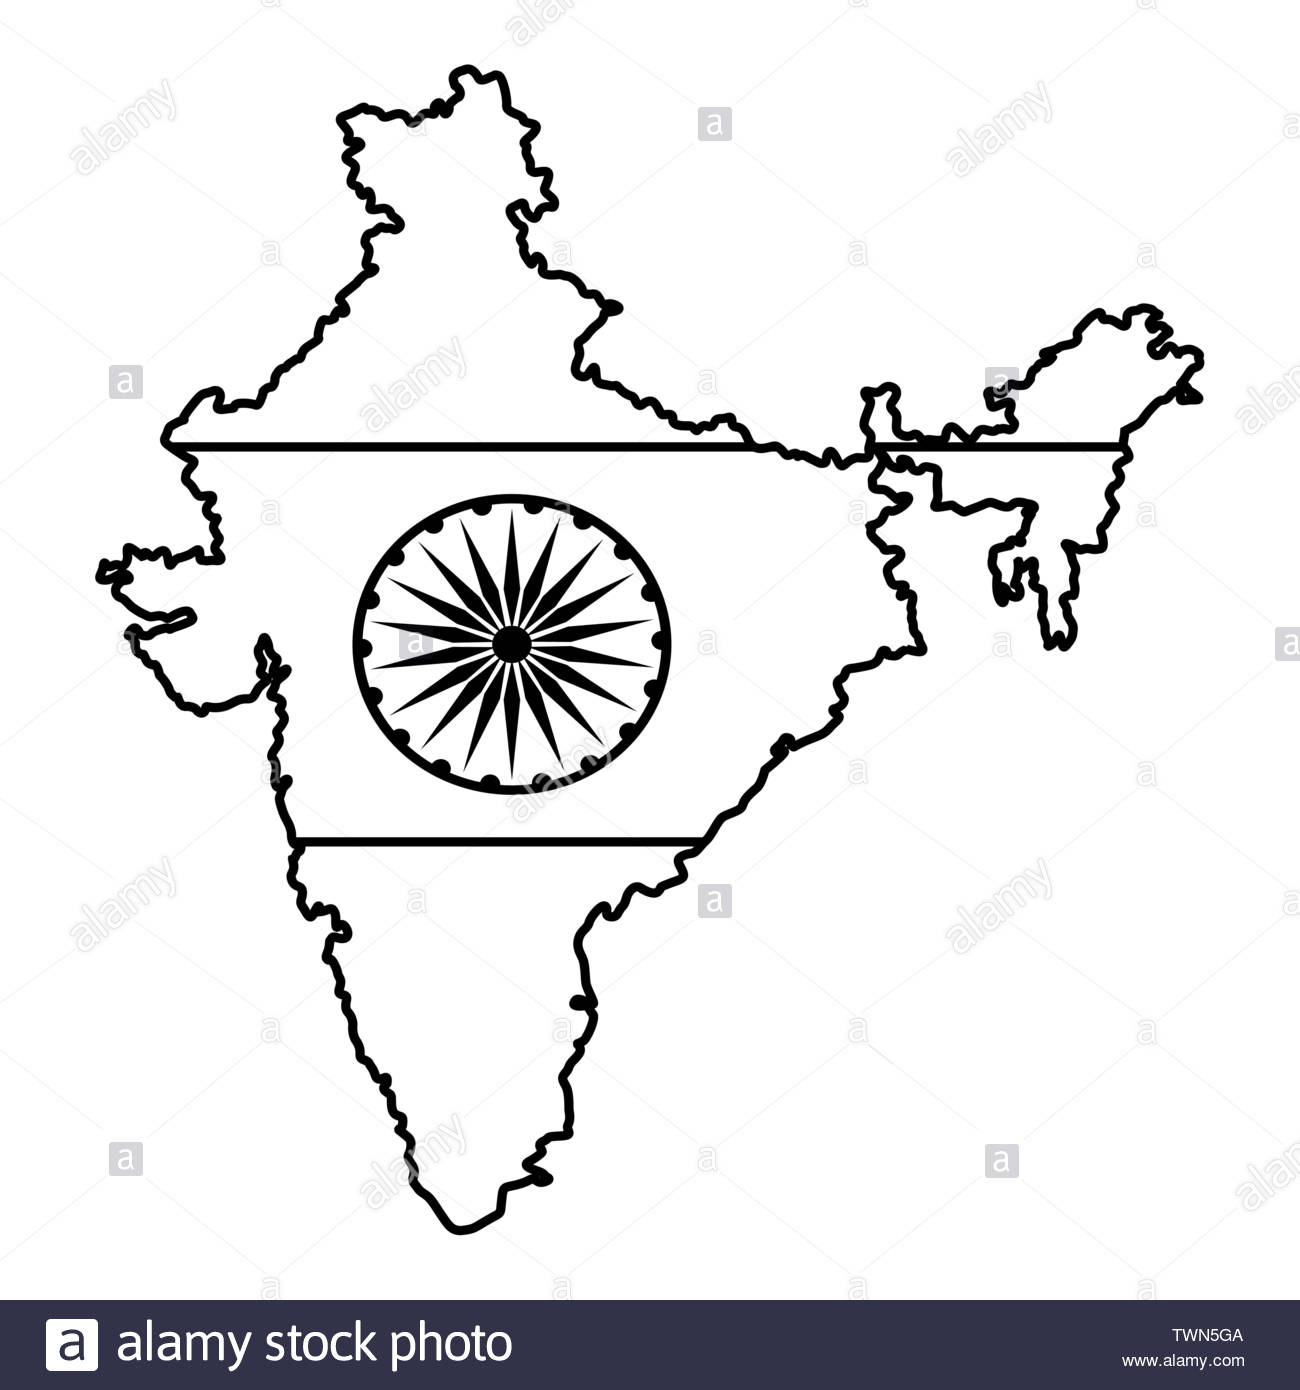 India Flag Black and White Stock Photos & Images.